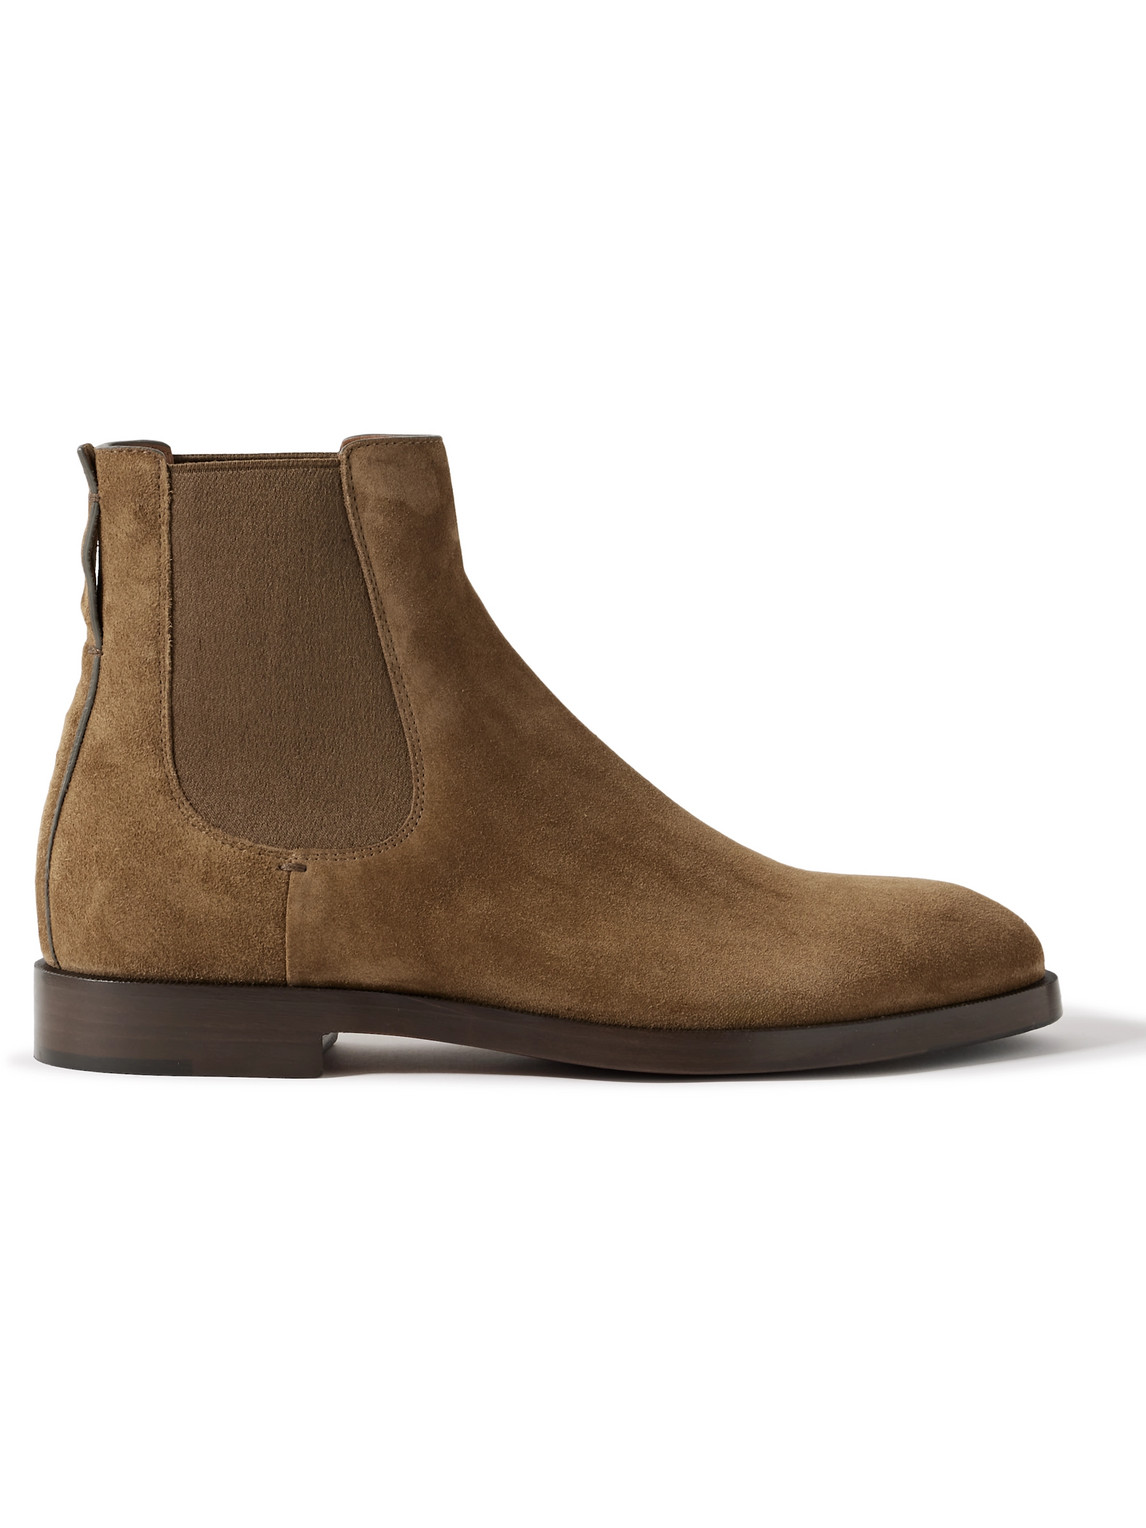 Zegna Torino Suede Chelsea Boots In Brown